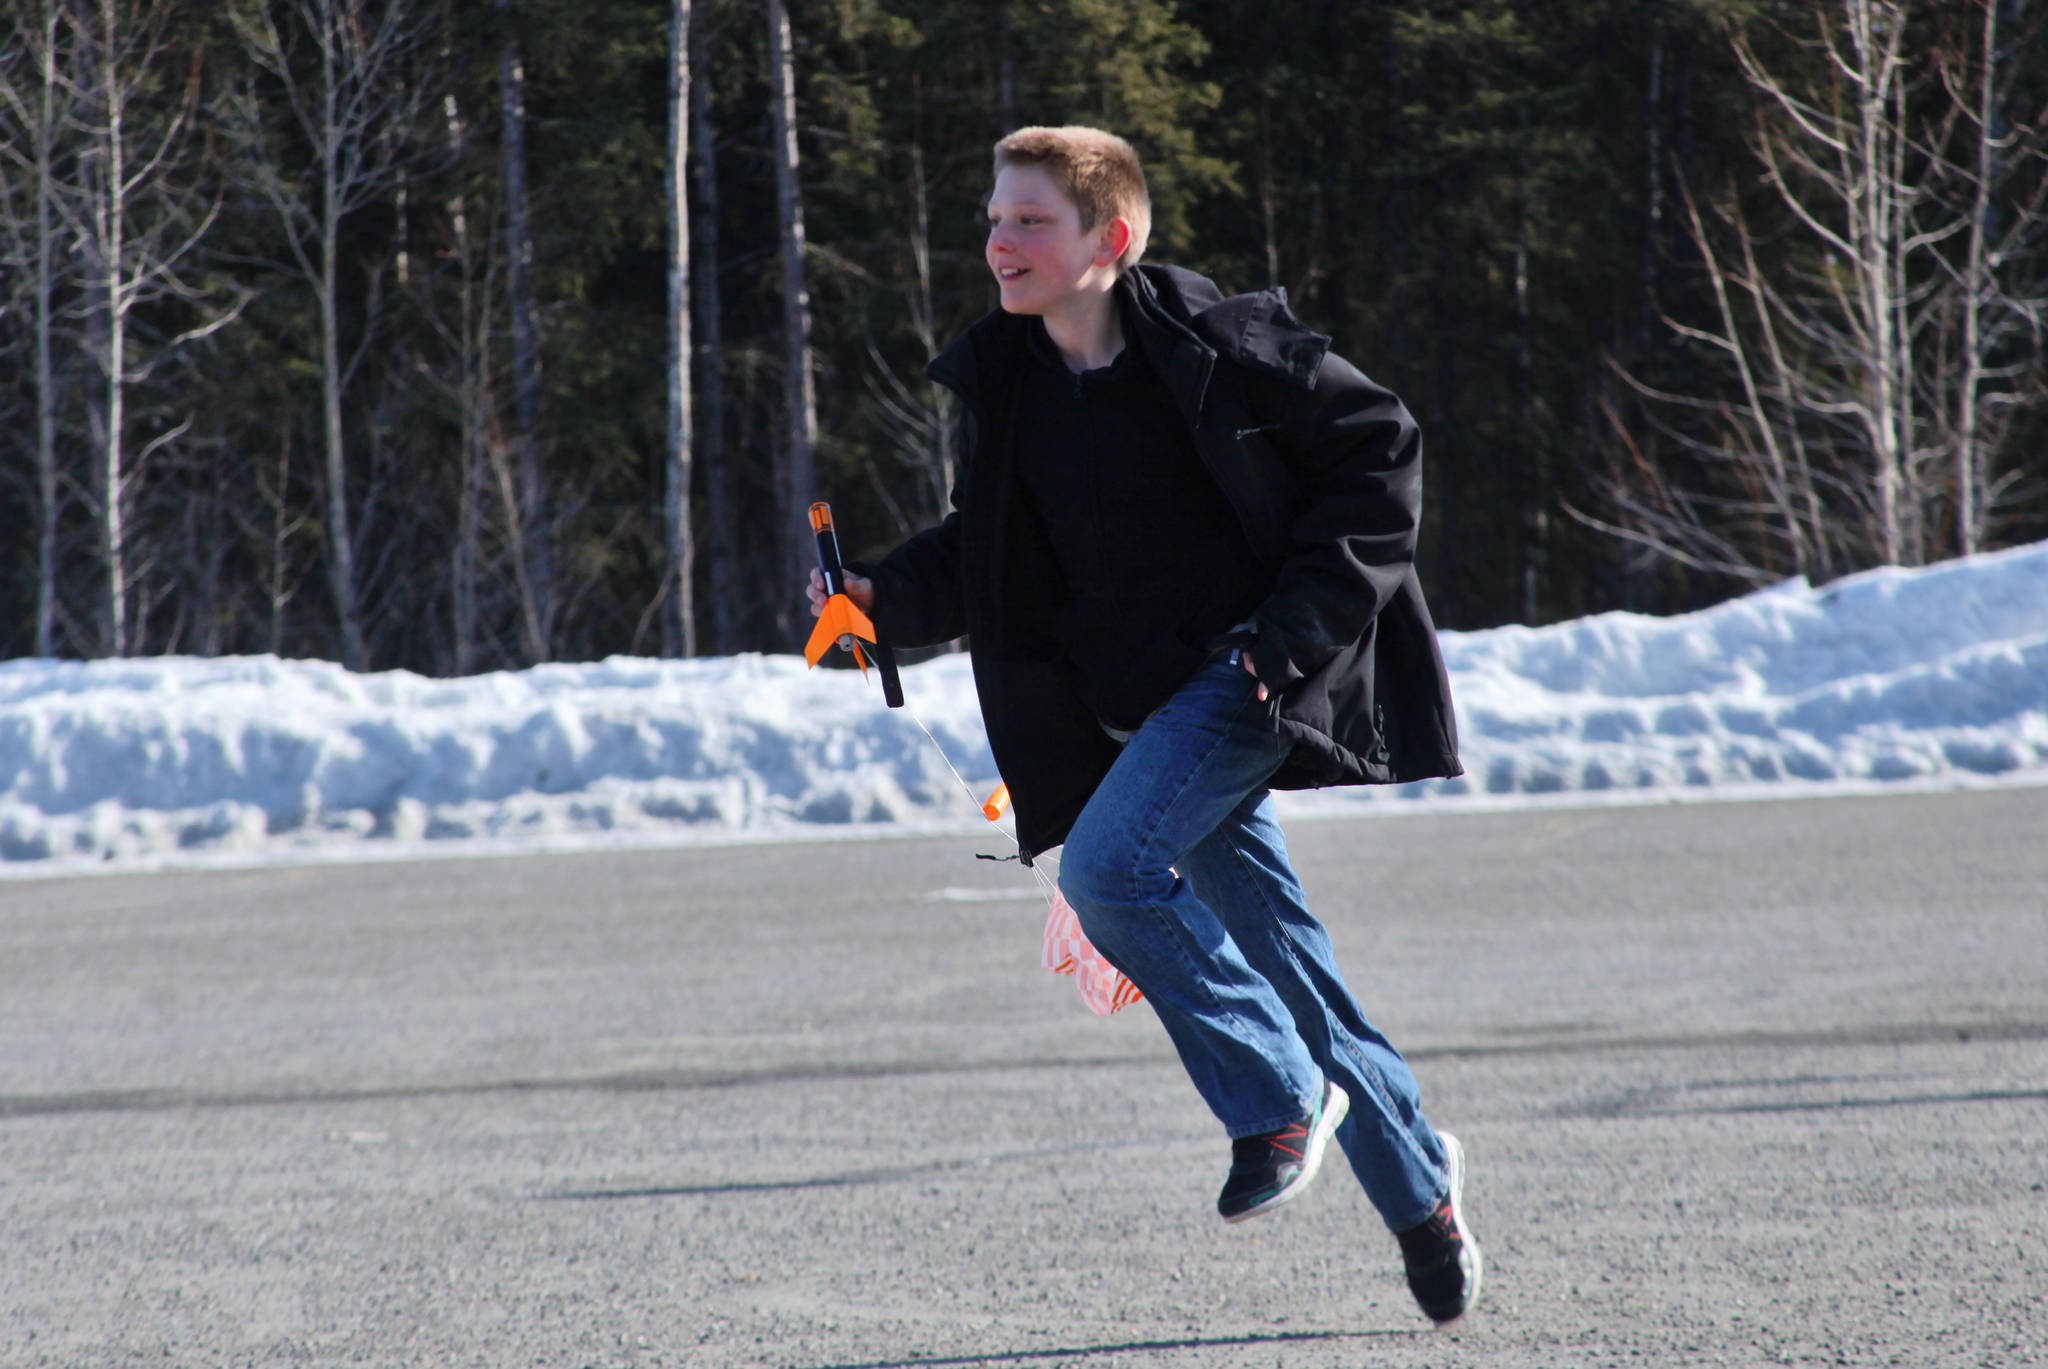 After catching a model rocket as it parachuted to Earth, Asa Lorentzen returns to the launch site during Scott Aleckson’s model rocketry class in the parking lot of the Soldotna Regional Sports Complex in Soldotna, Alaska on Saturday, May 31, 2018. Aleckson said he made and launched his first plastic, balsa wood, and cardboard rocket as a 4th grade student at Soldotna Elementary School. Since then he’s built a custom launch system, he said, “with recycled electronics and a lot of soldering time.” Aleckson taught Saturday’s rocketry class through the Soldotna Community Schools program, and would like to continue spreading the hobby. “If I could get a model rocket club going, that’d be great,” he said. “Stuff like this is much more fun in a group.”